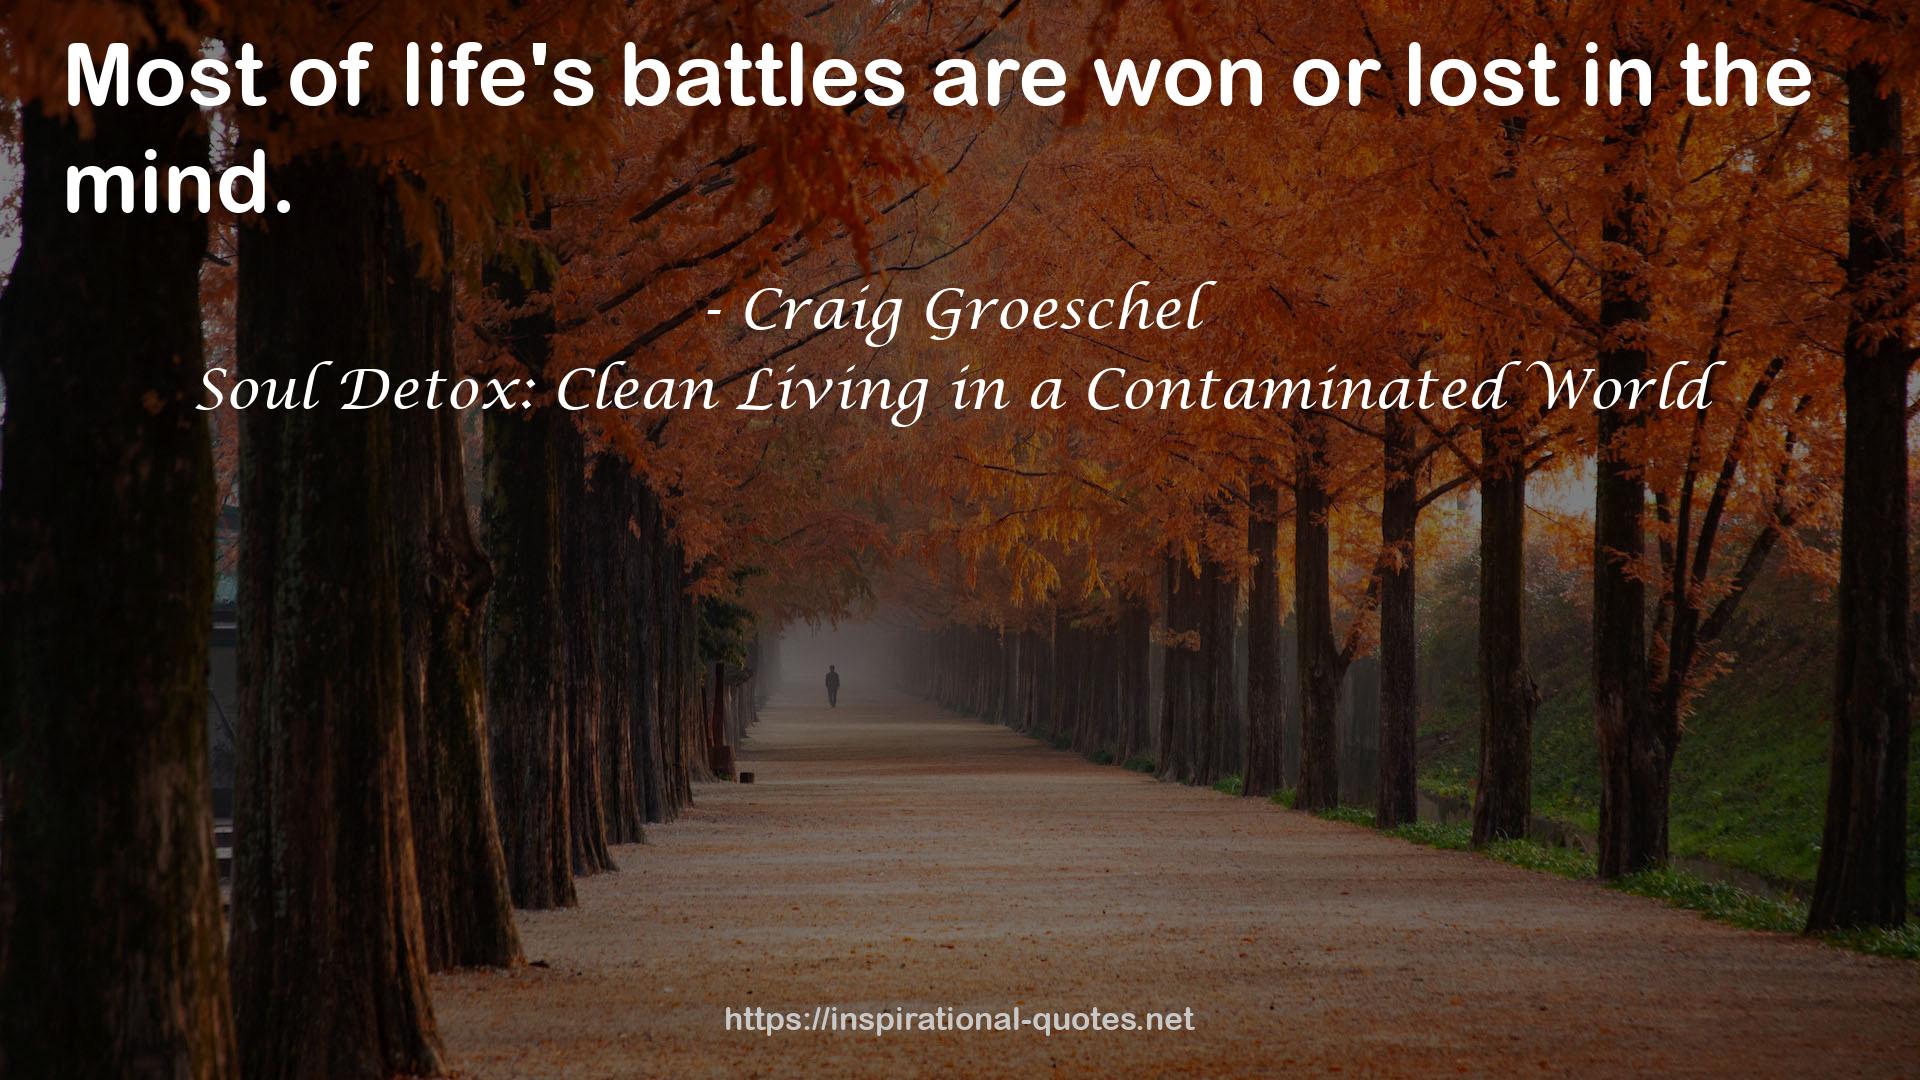 Soul Detox: Clean Living in a Contaminated World QUOTES